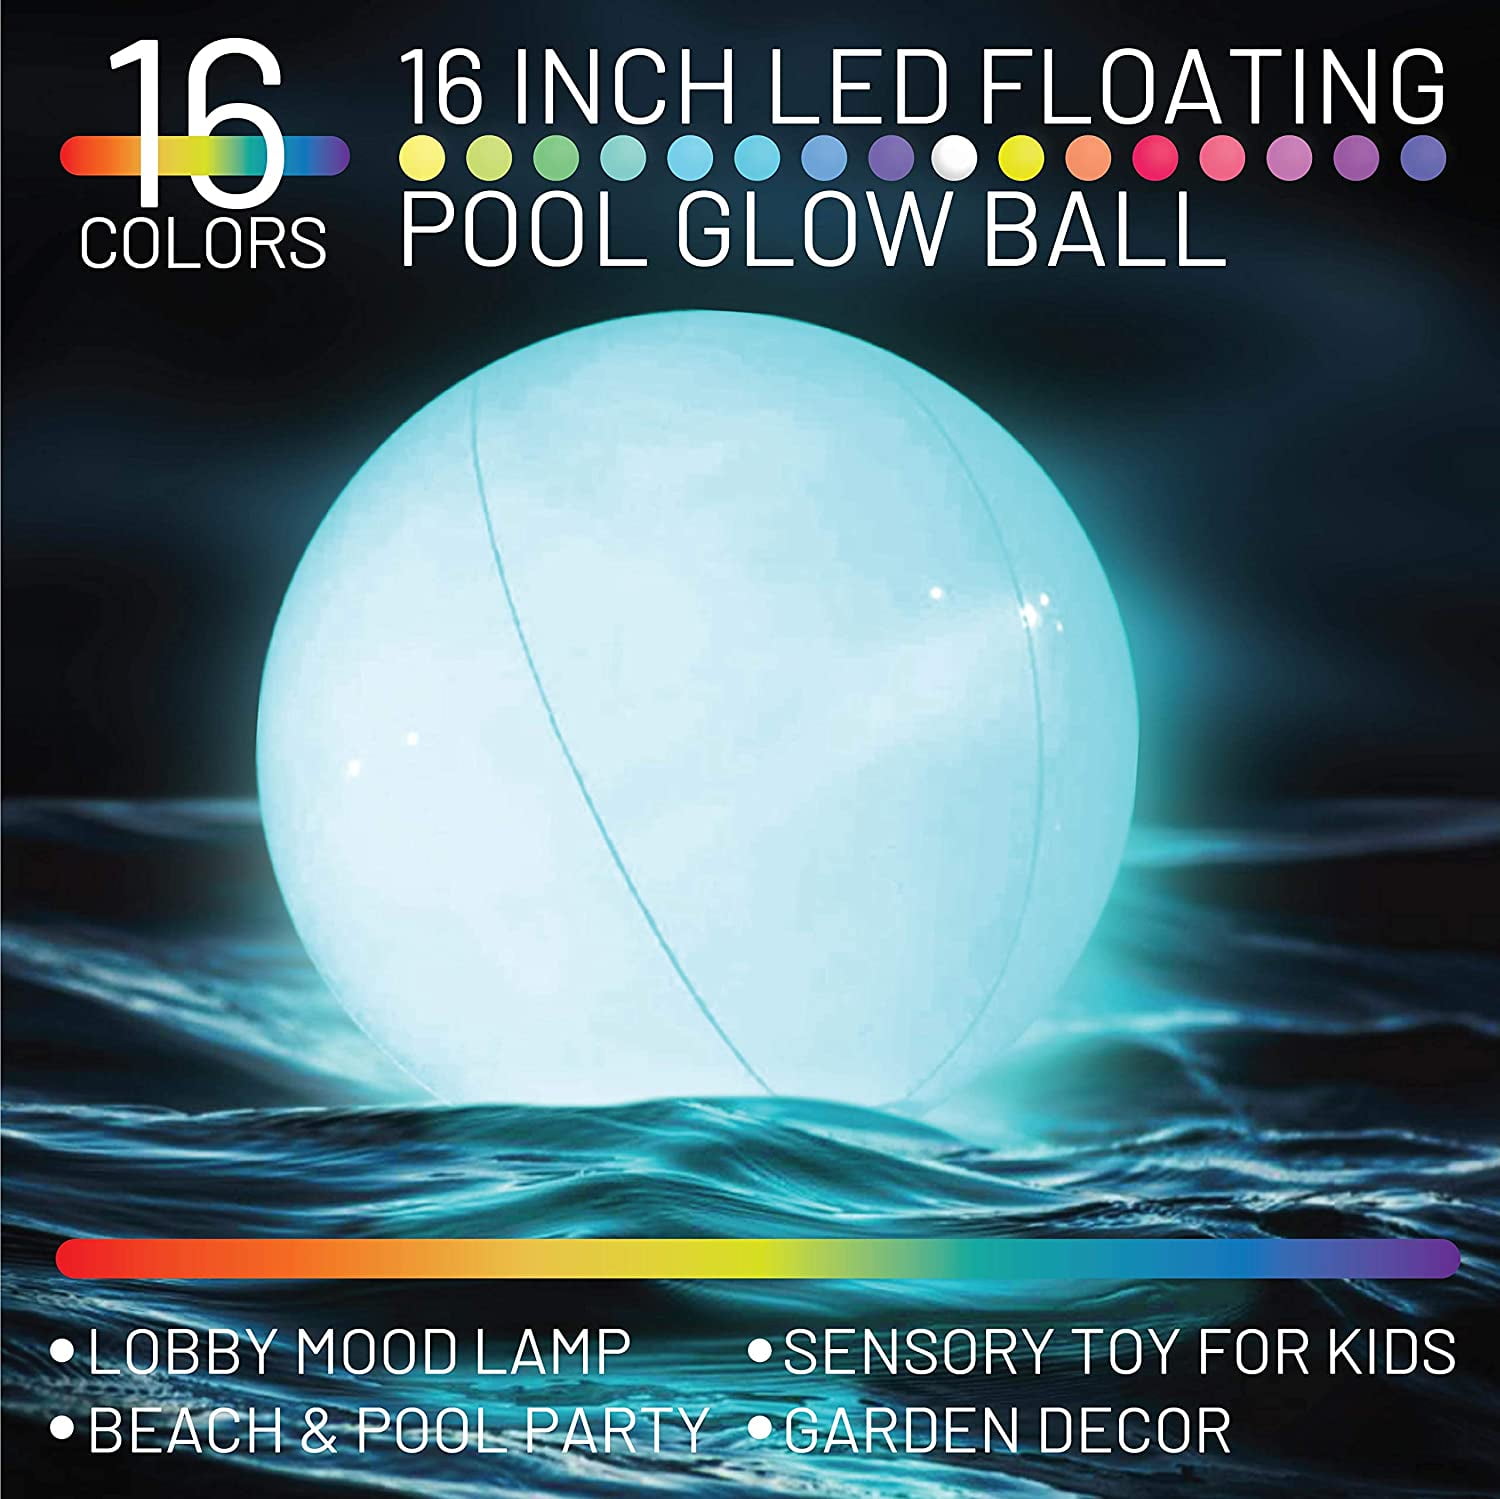 10 Grade Brightness Glow Ball for Outdoor Pool Beach Party Games for Adults Pool Patio Garden Decorations 4 Pieces Pool Toys 16 Inch LED Beach Ball with Remote Control 16 Colors 4 Models 